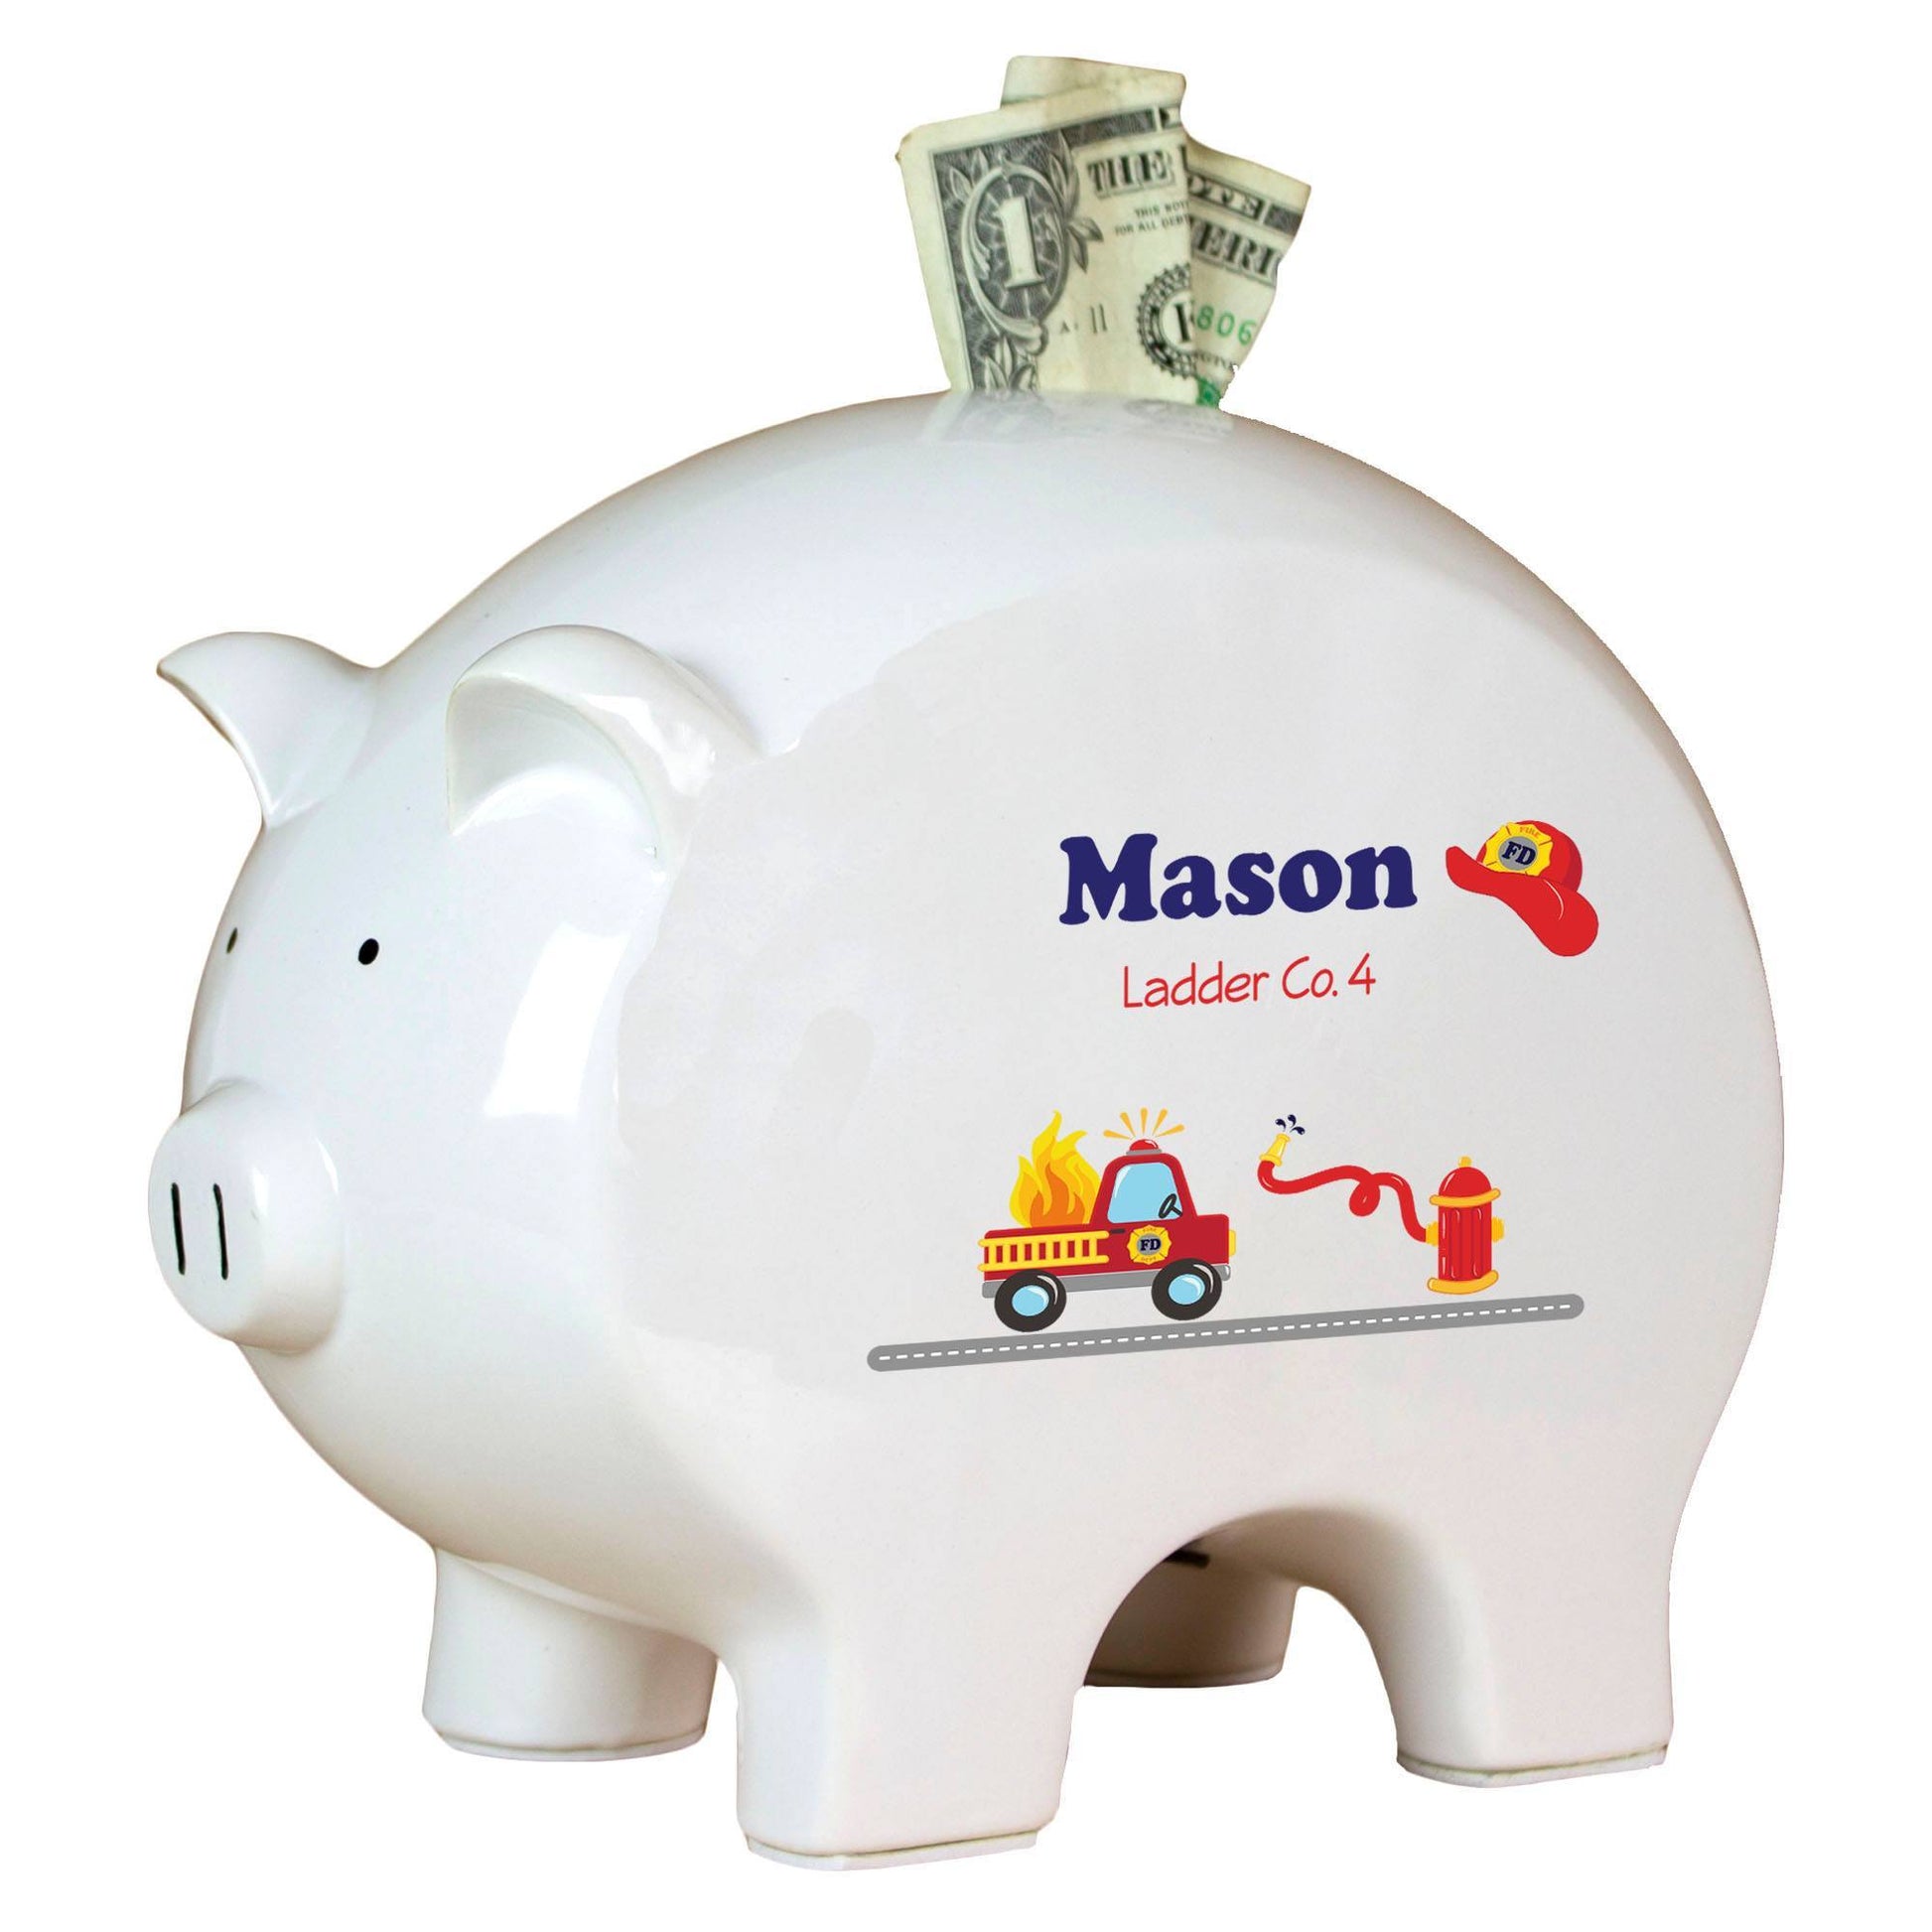 Personalized Piggy Bank with Fire Truck design